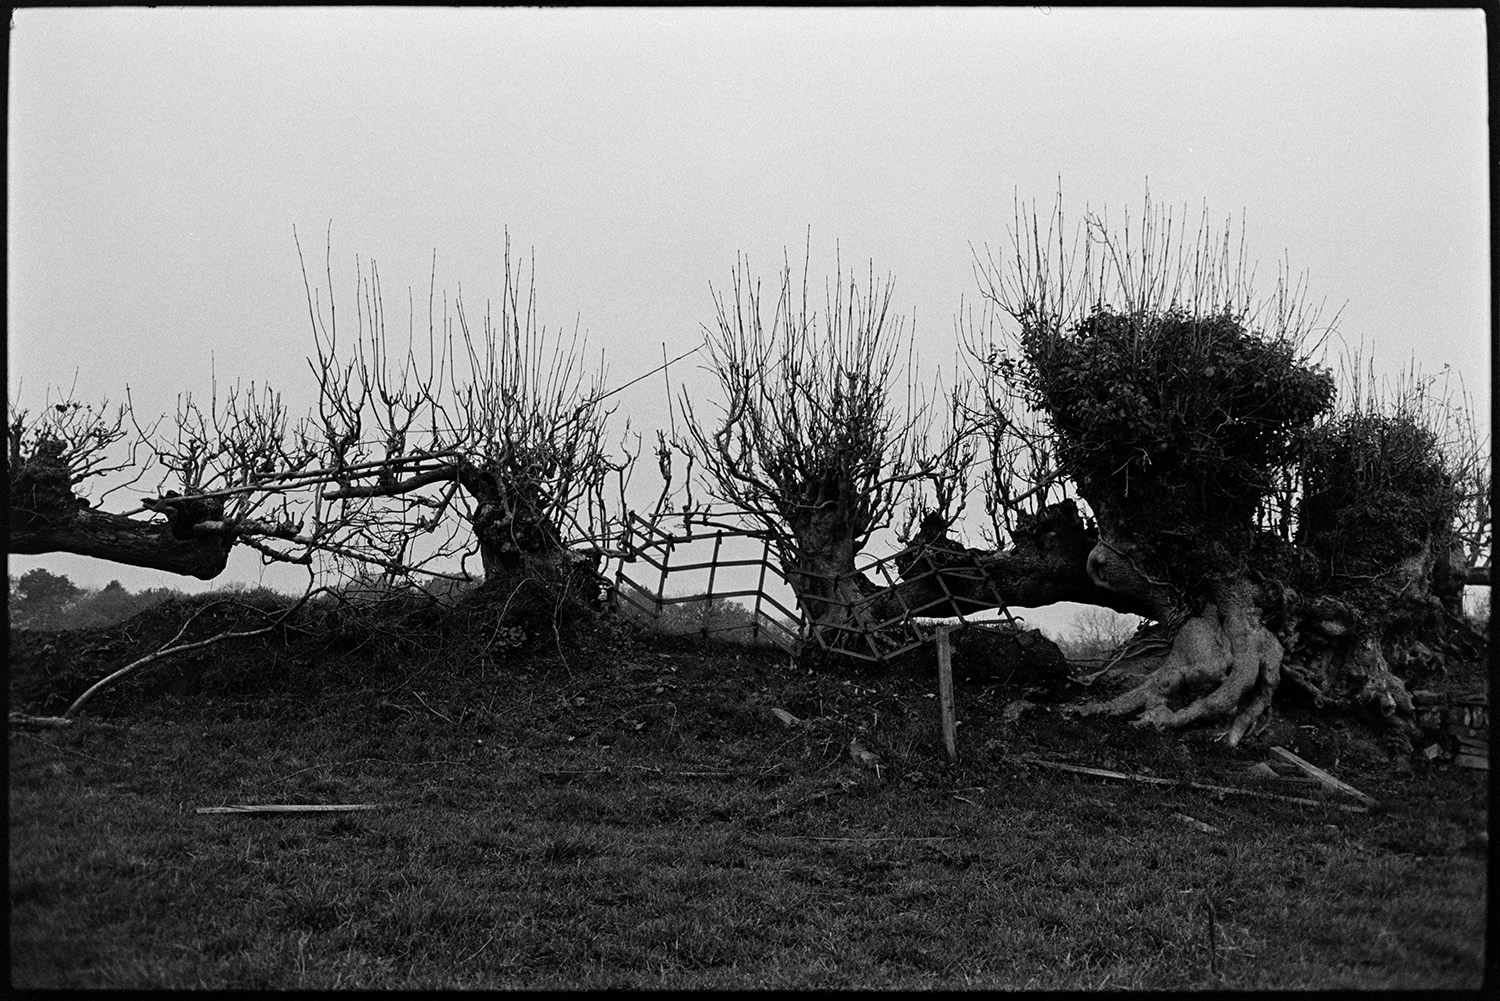 Cows coming in to farm to be milked.
[A hedge or field boundary containing pollarded trees and their roots at Woolridge, Dolton. A gap has been filled with a metal cattle pen.]